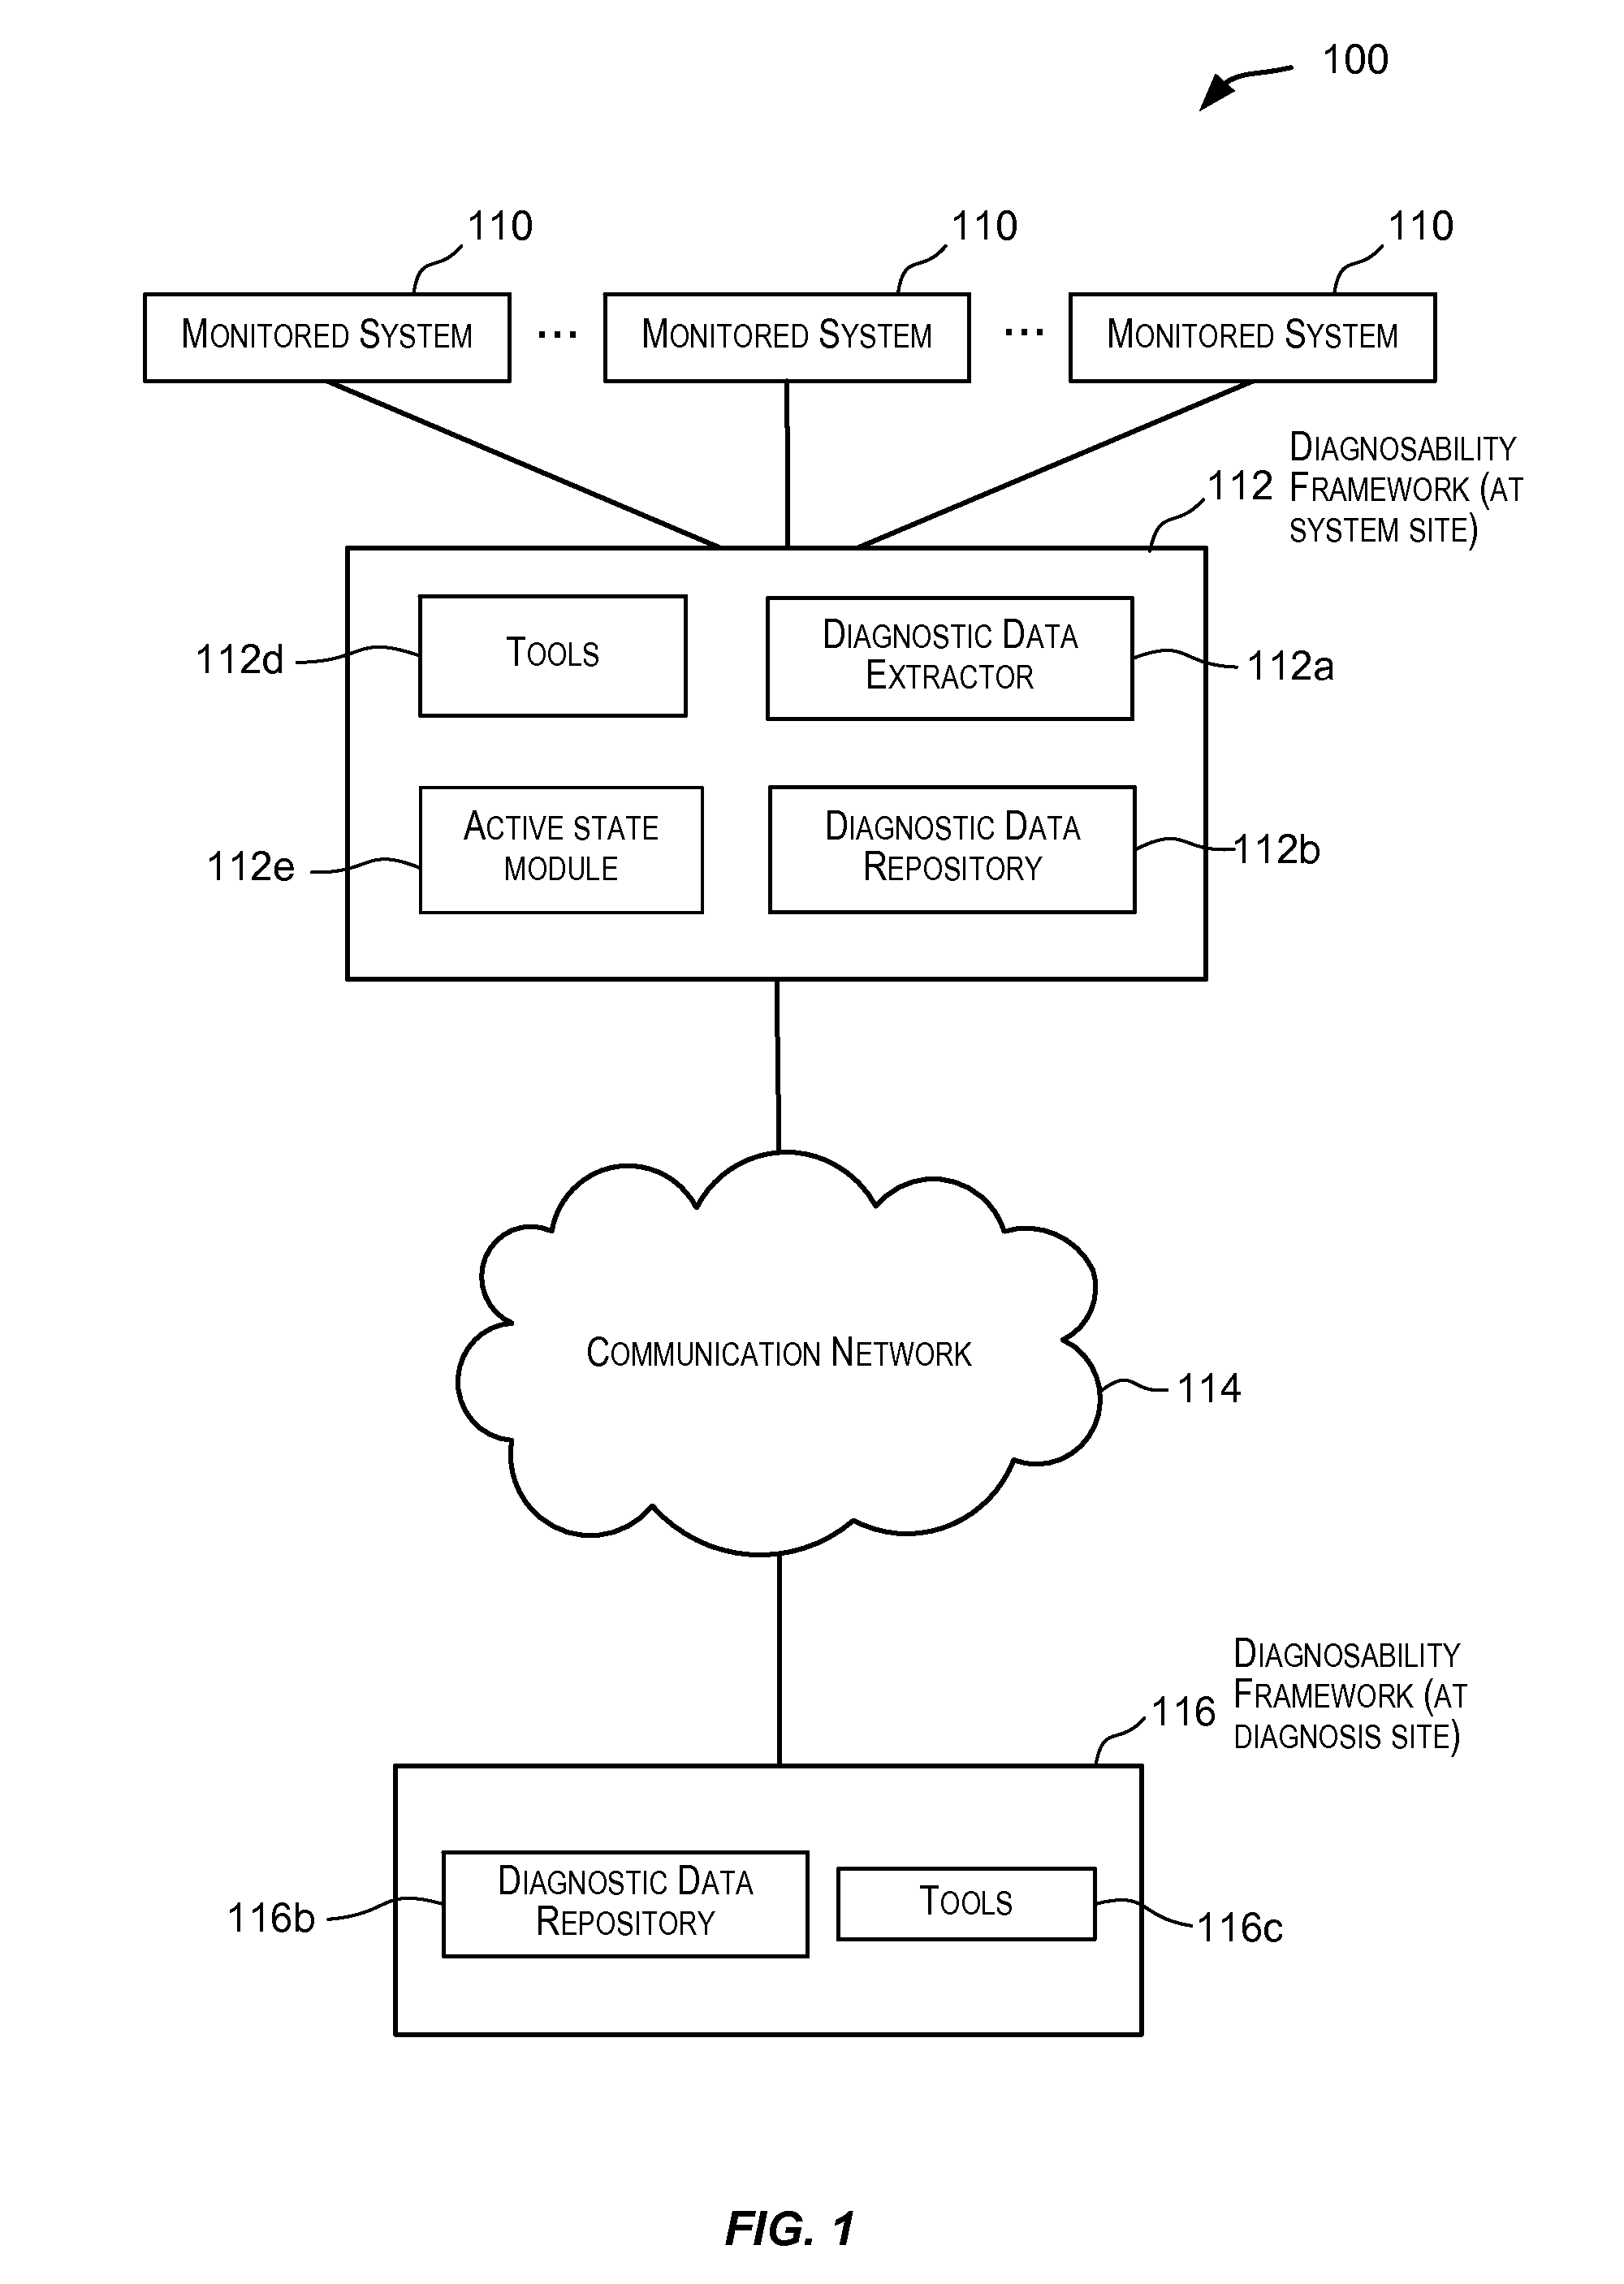 Gathering information for use in diagnostic data dumping upon failure occurrence